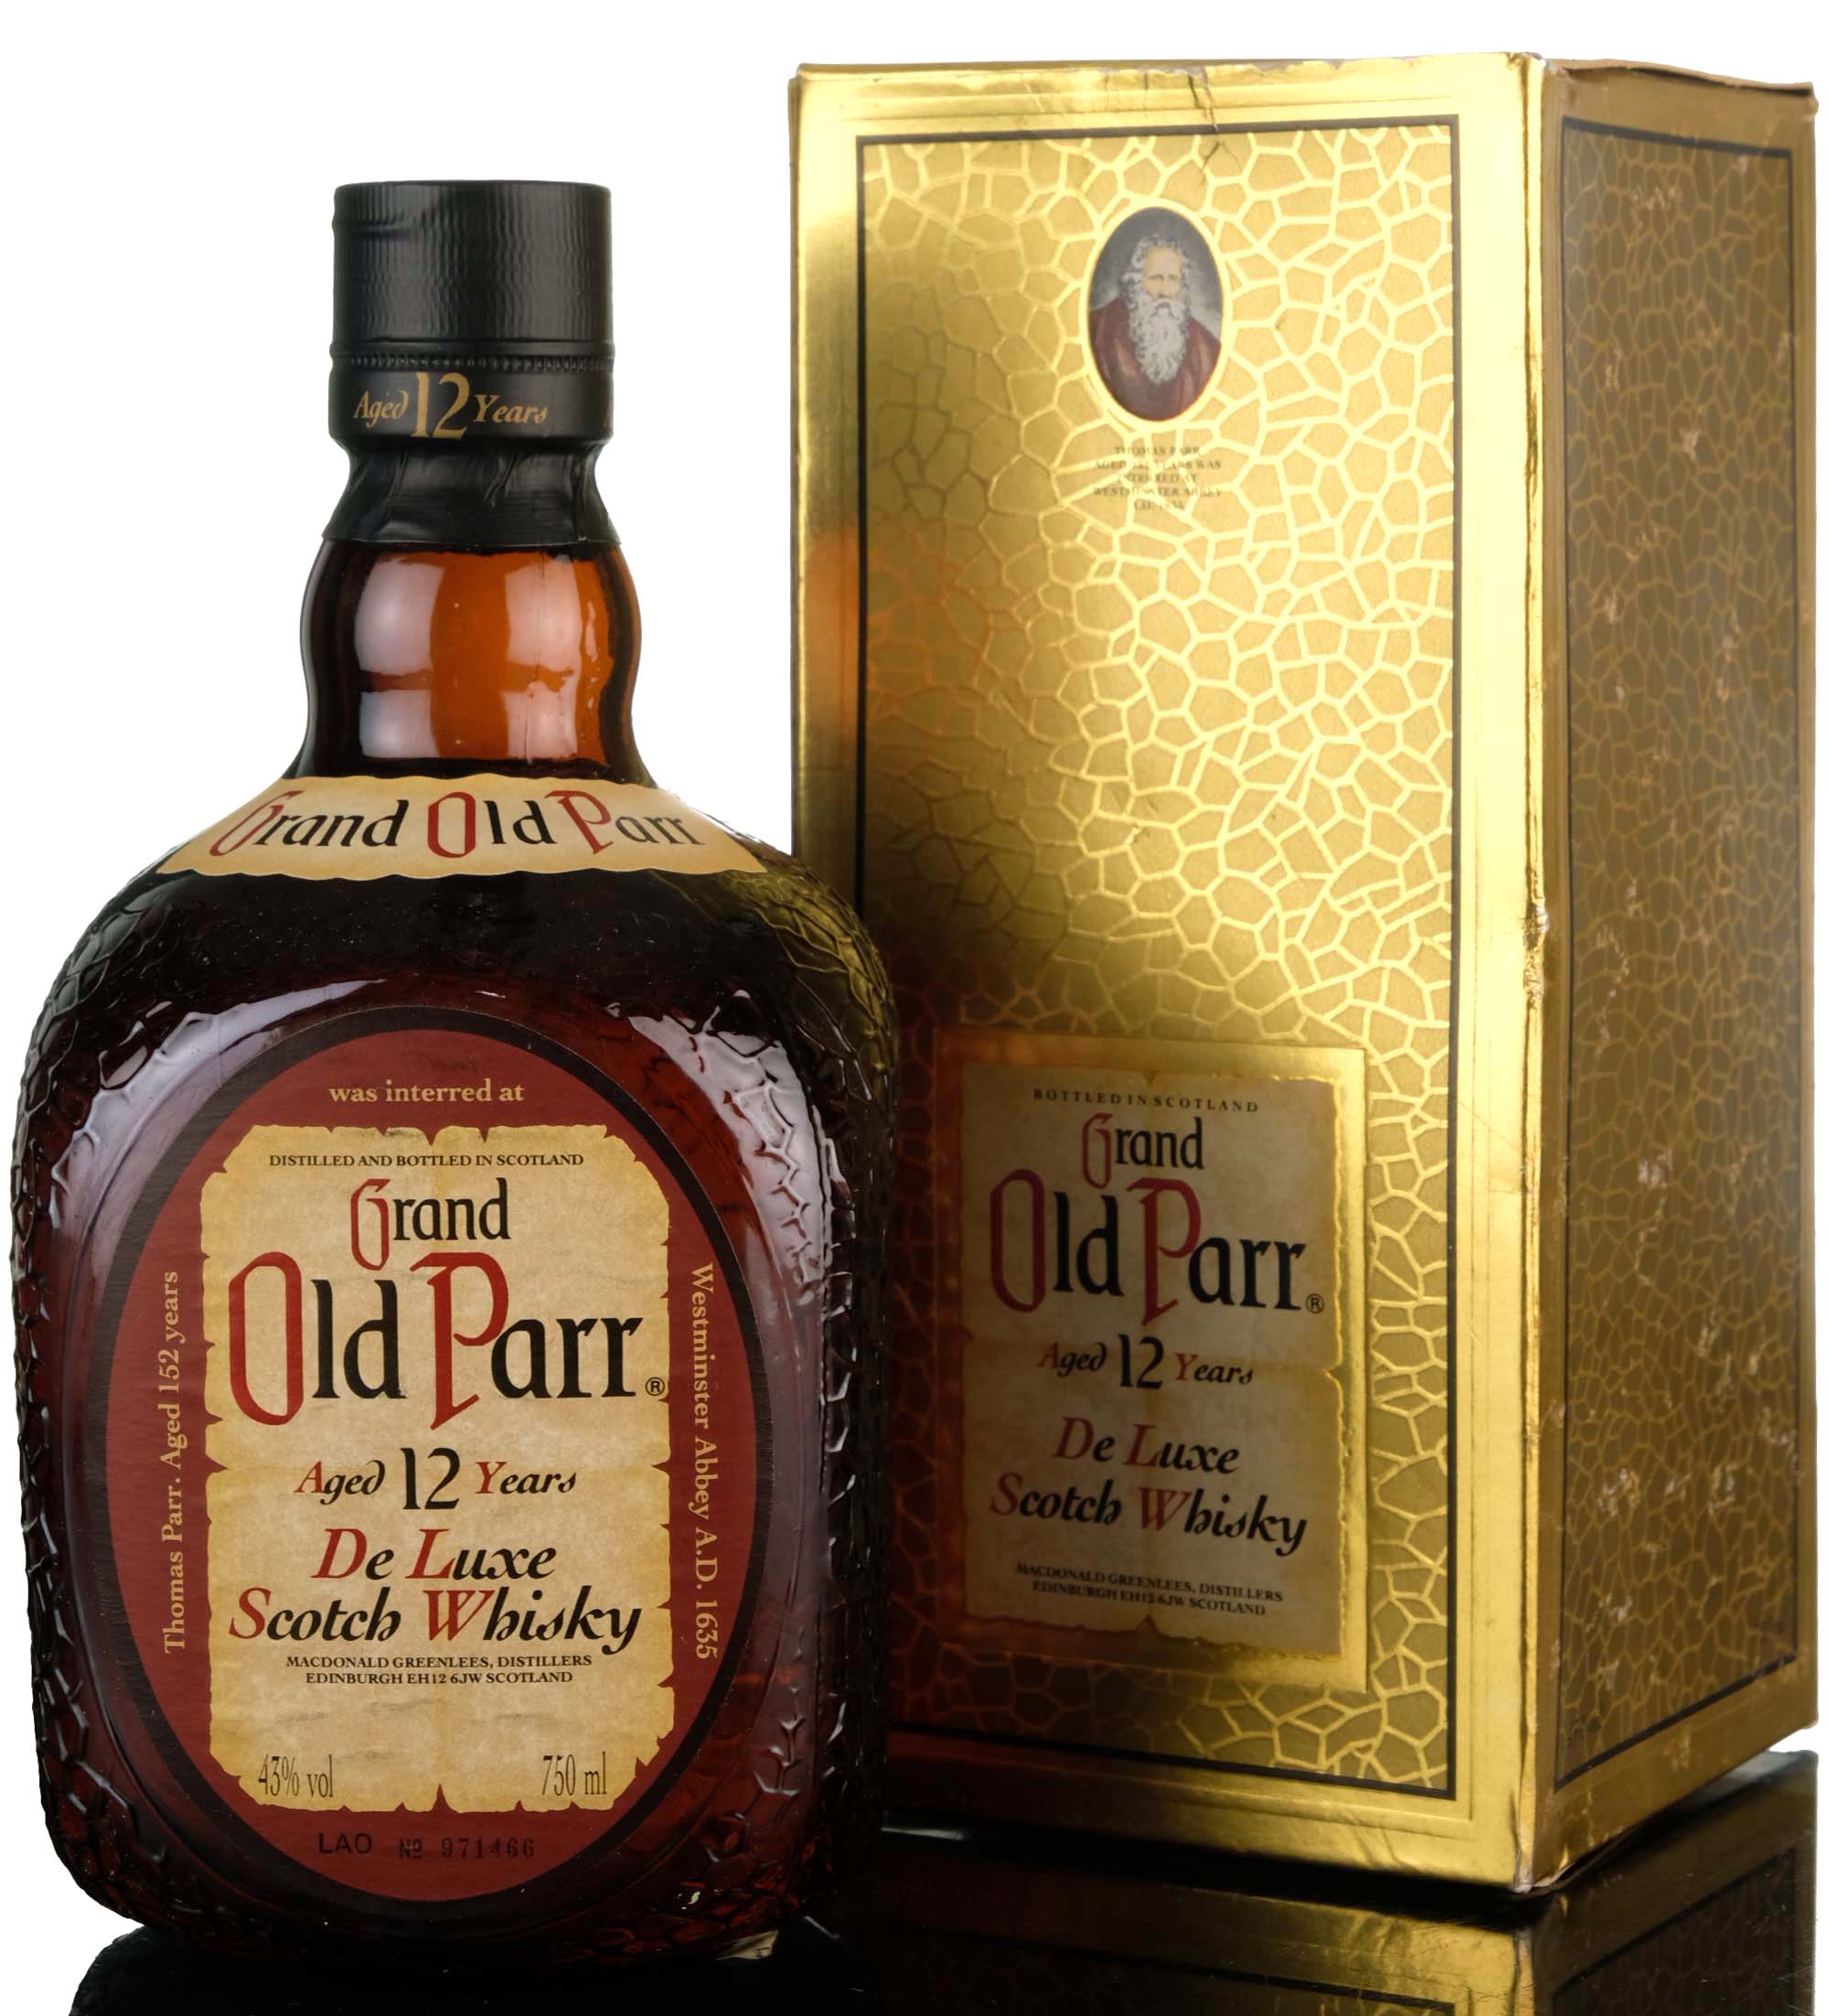 Grand Old Parr 12 Year Old - De Luxe - 1980s